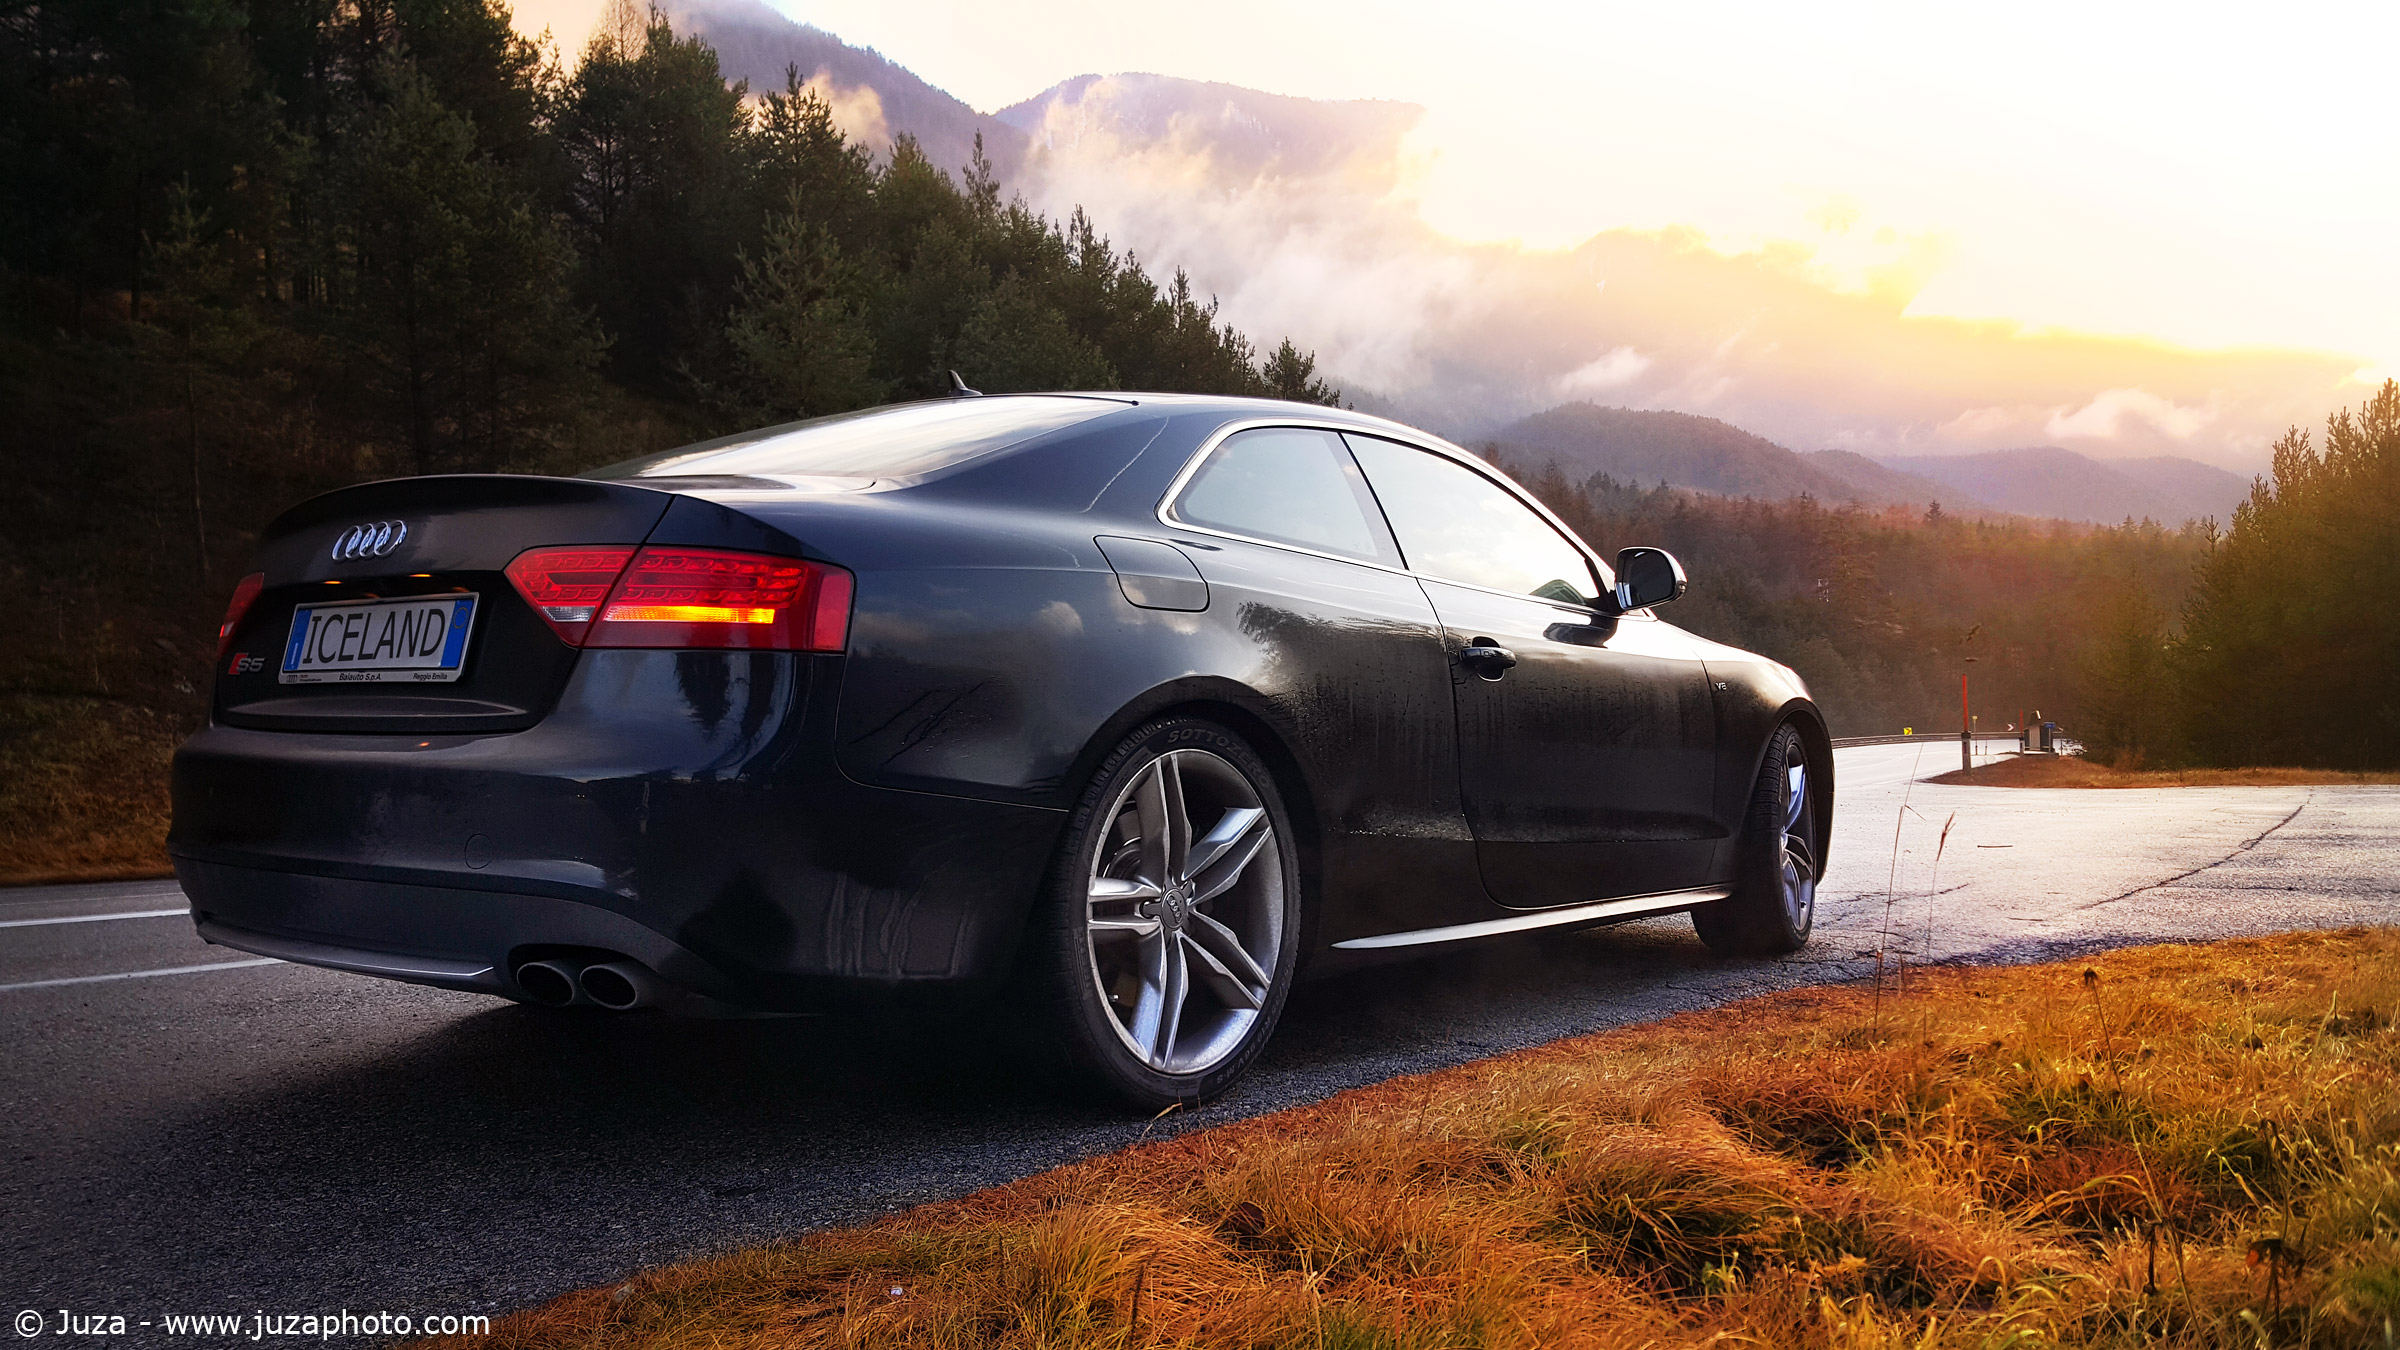 Audi S5 (traveling to Iceland)...